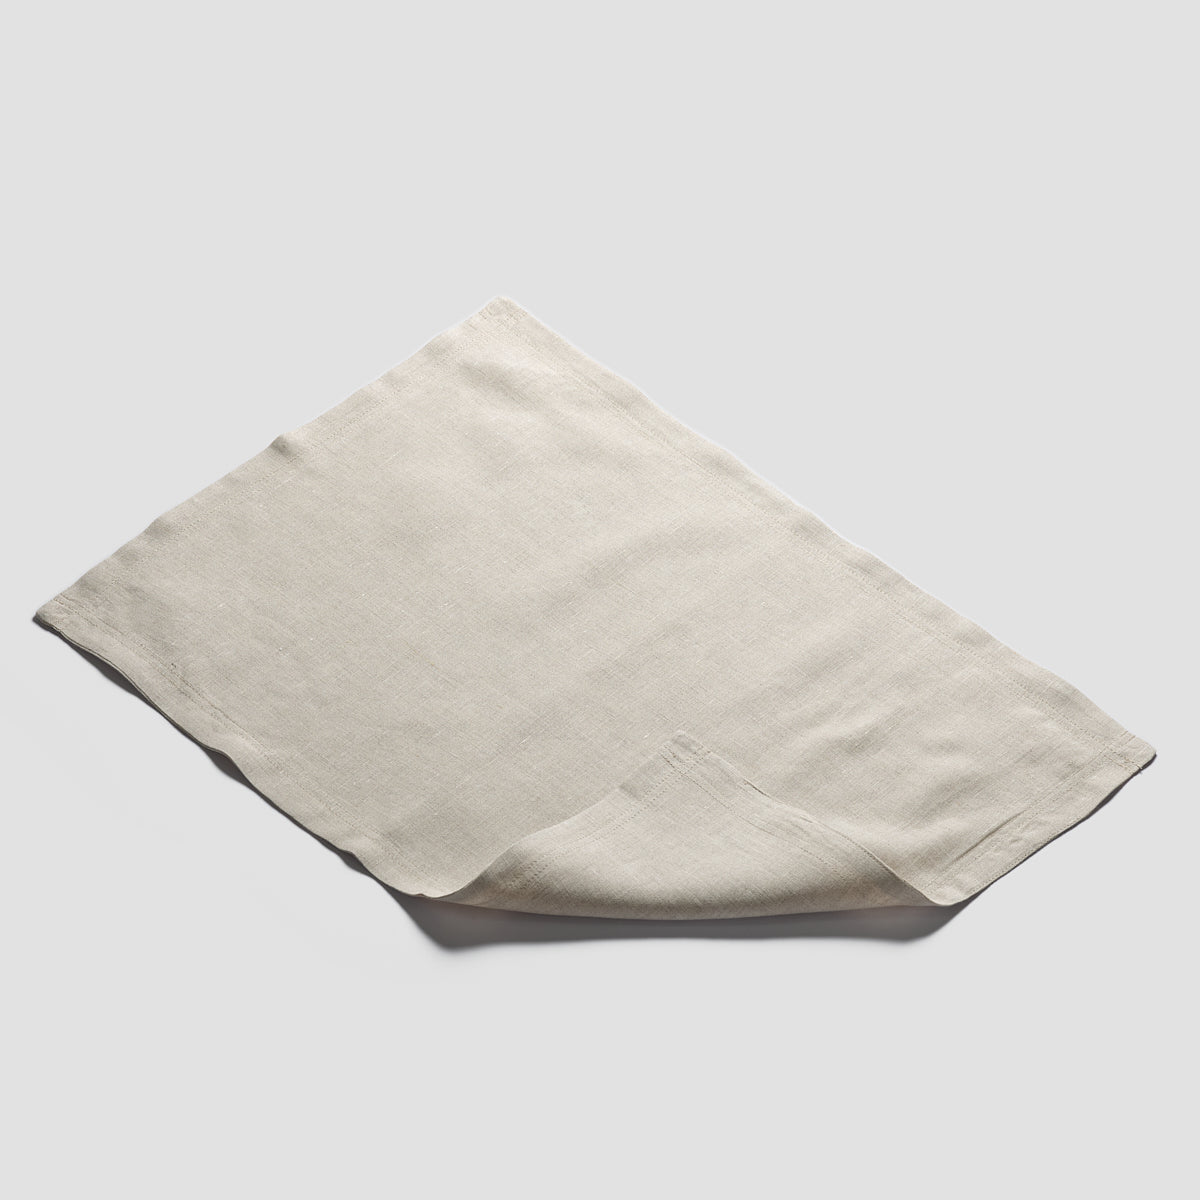 Oatmeal Linen Placemat Set - Piglet in Bed